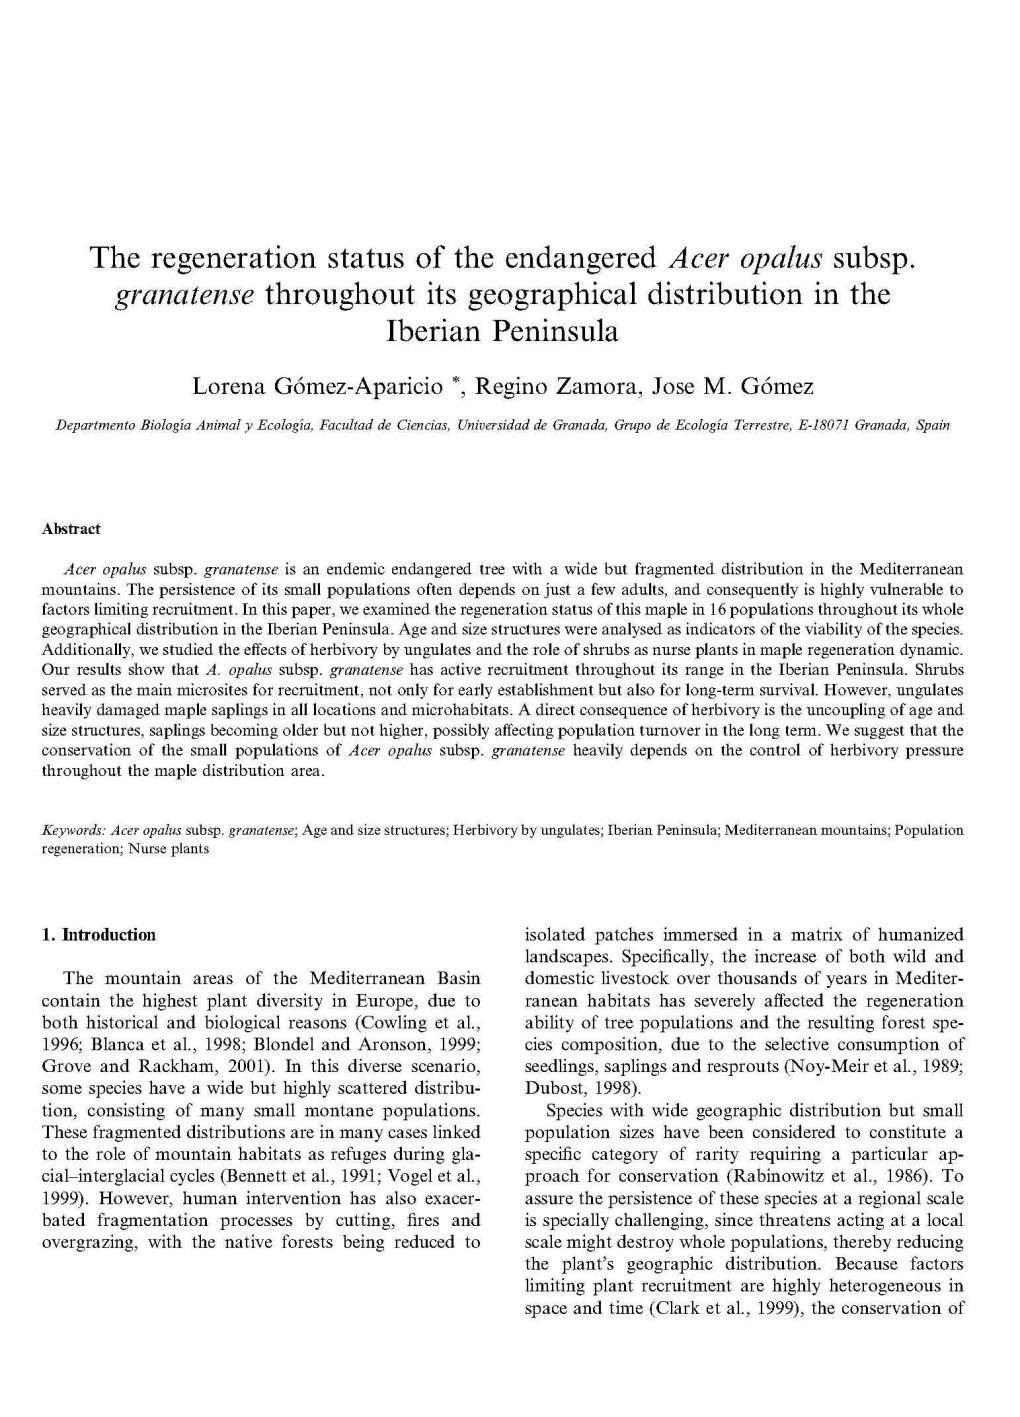 The Regeneration Status of the Endangered Acer Opalus Subsp